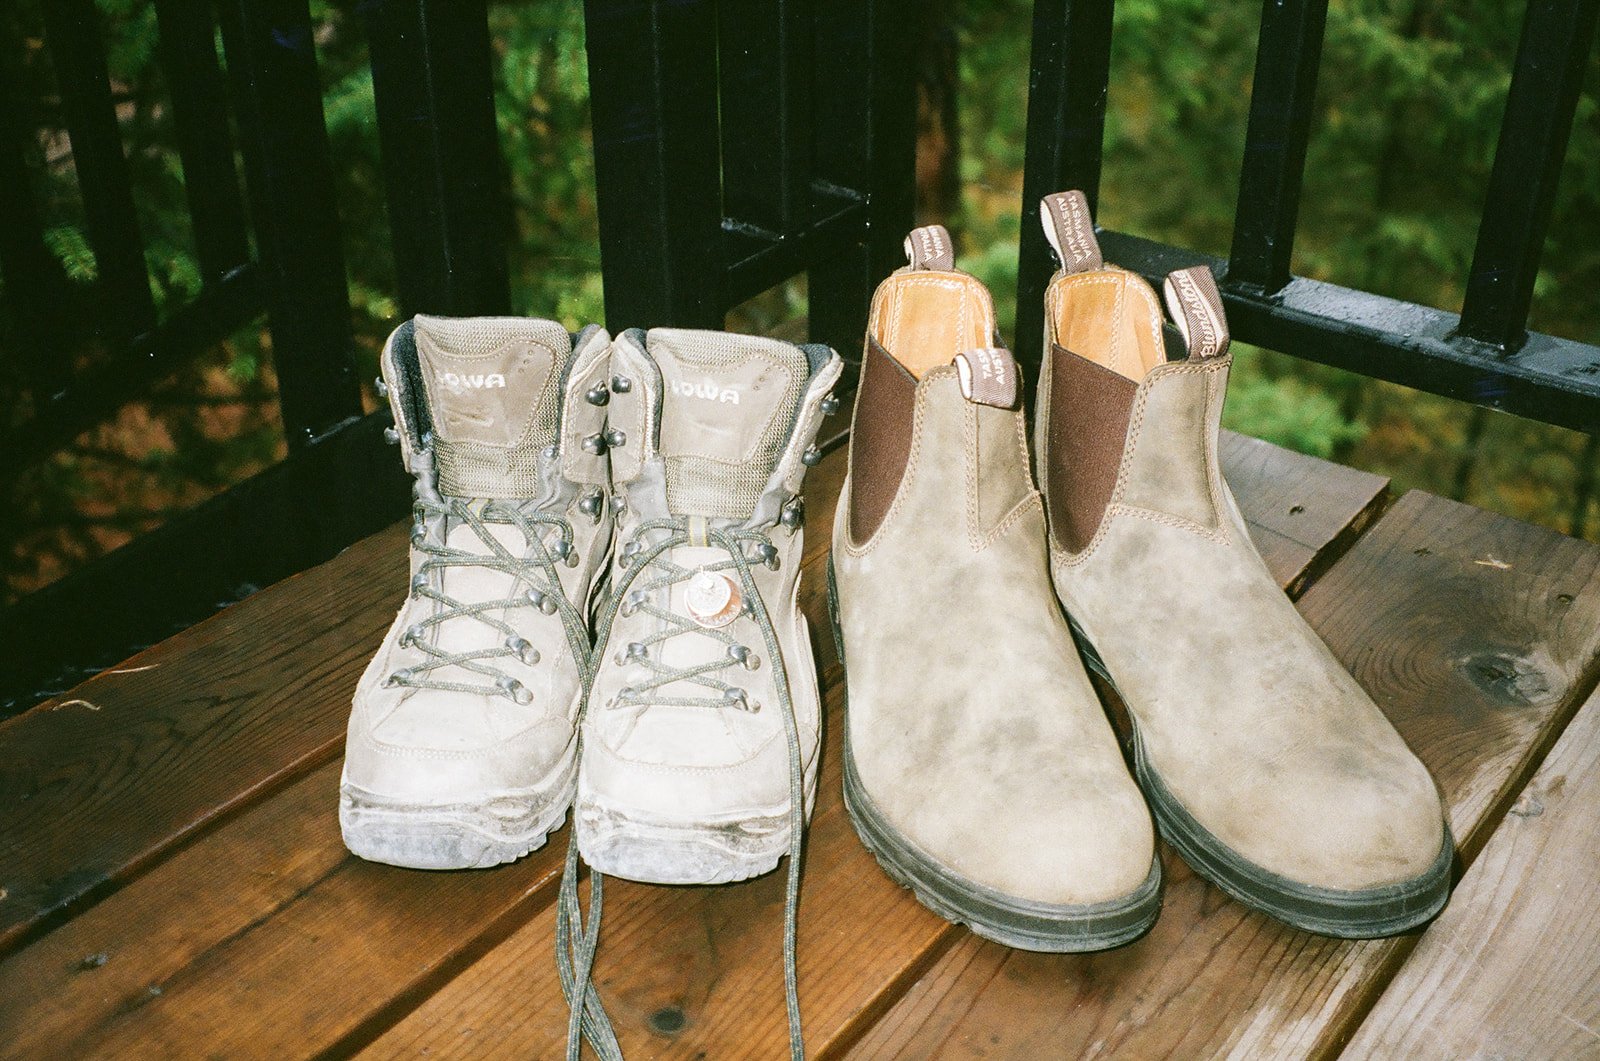 Film photo of bride and groom shoes for a national park elopement